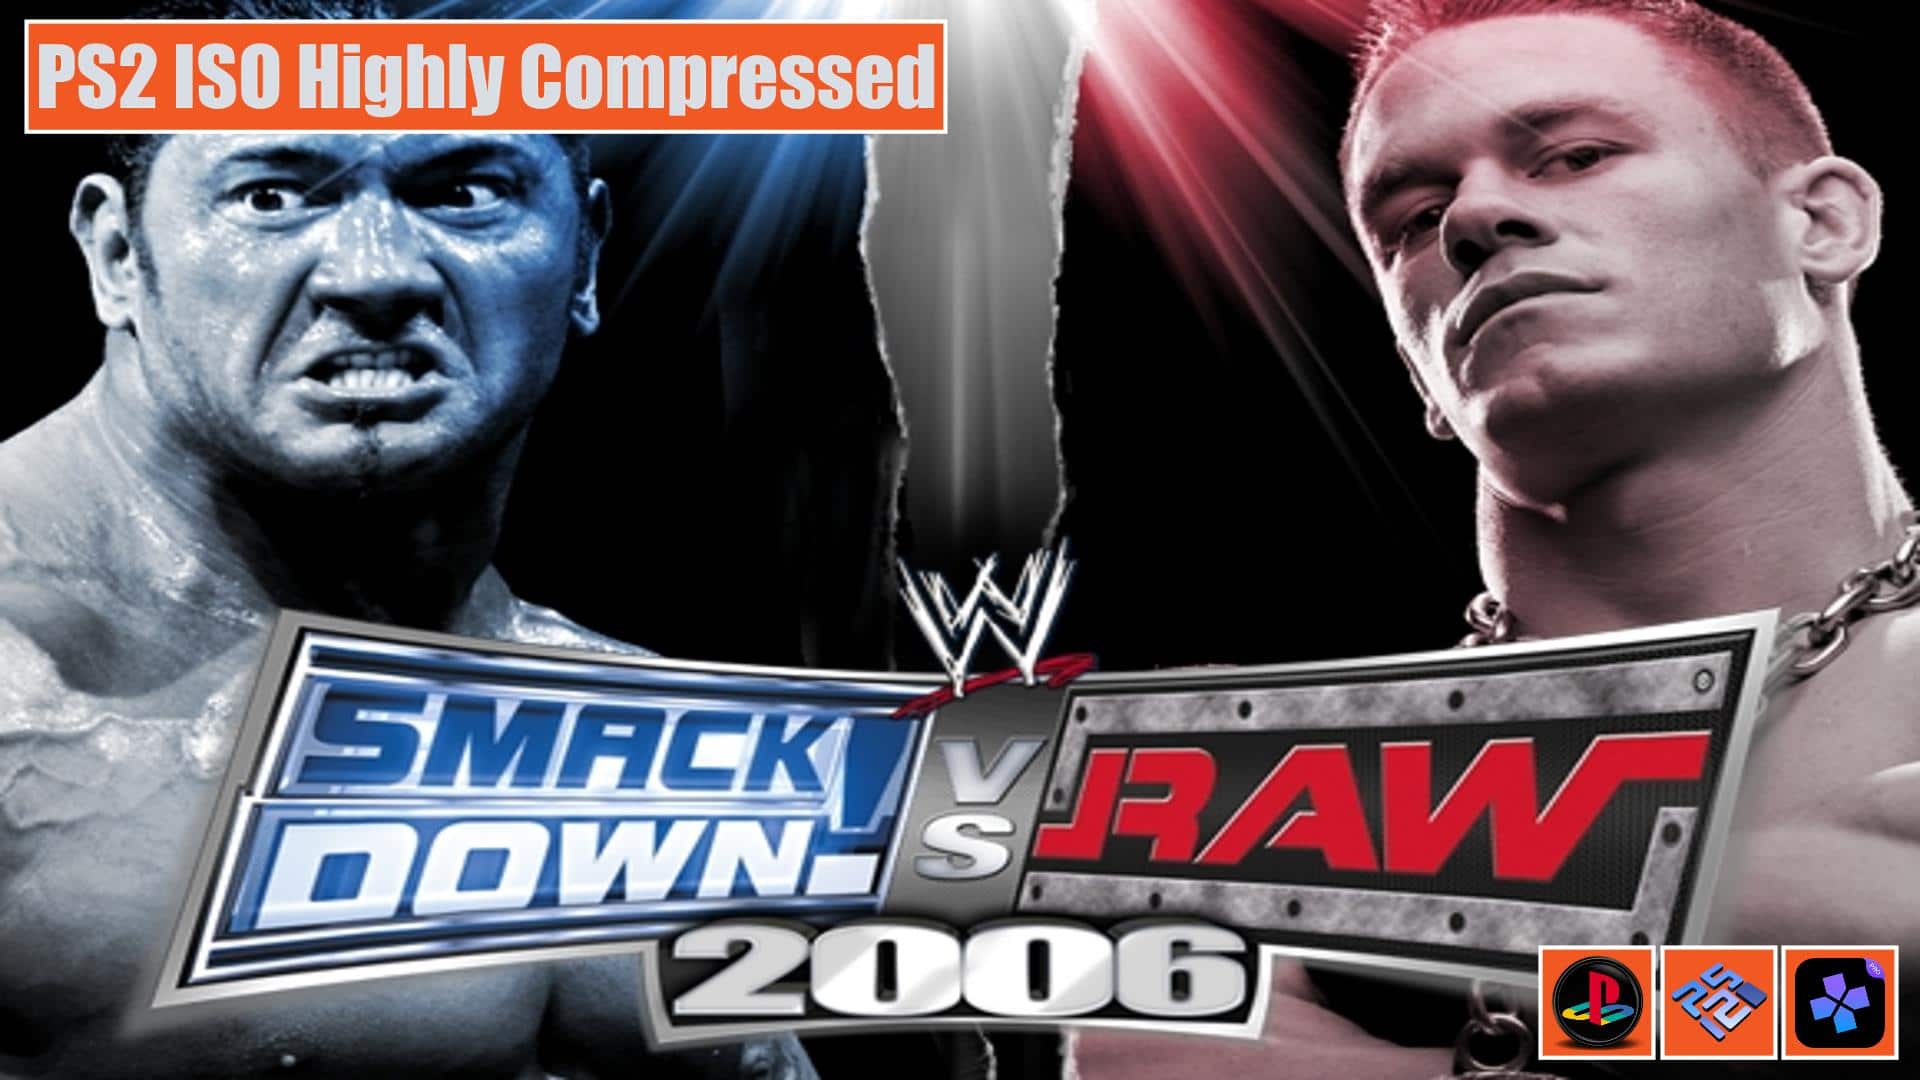 wwe smackdown vs raw 2006 save file ppsspp